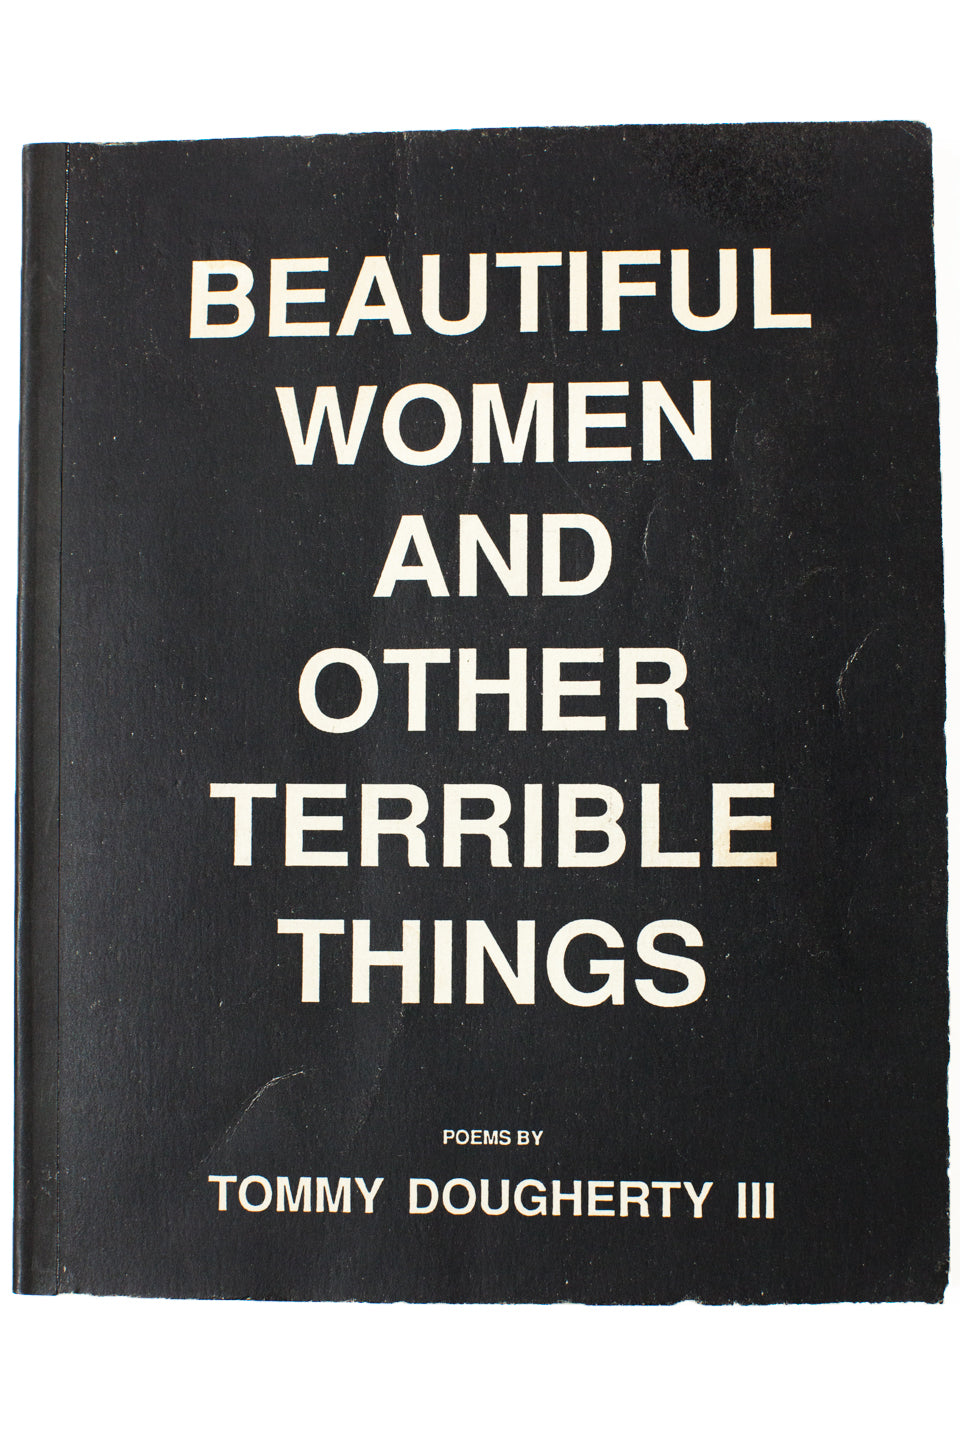 BEAUTIFUL WOMEN AND OTHER TERRIBLE THINGS